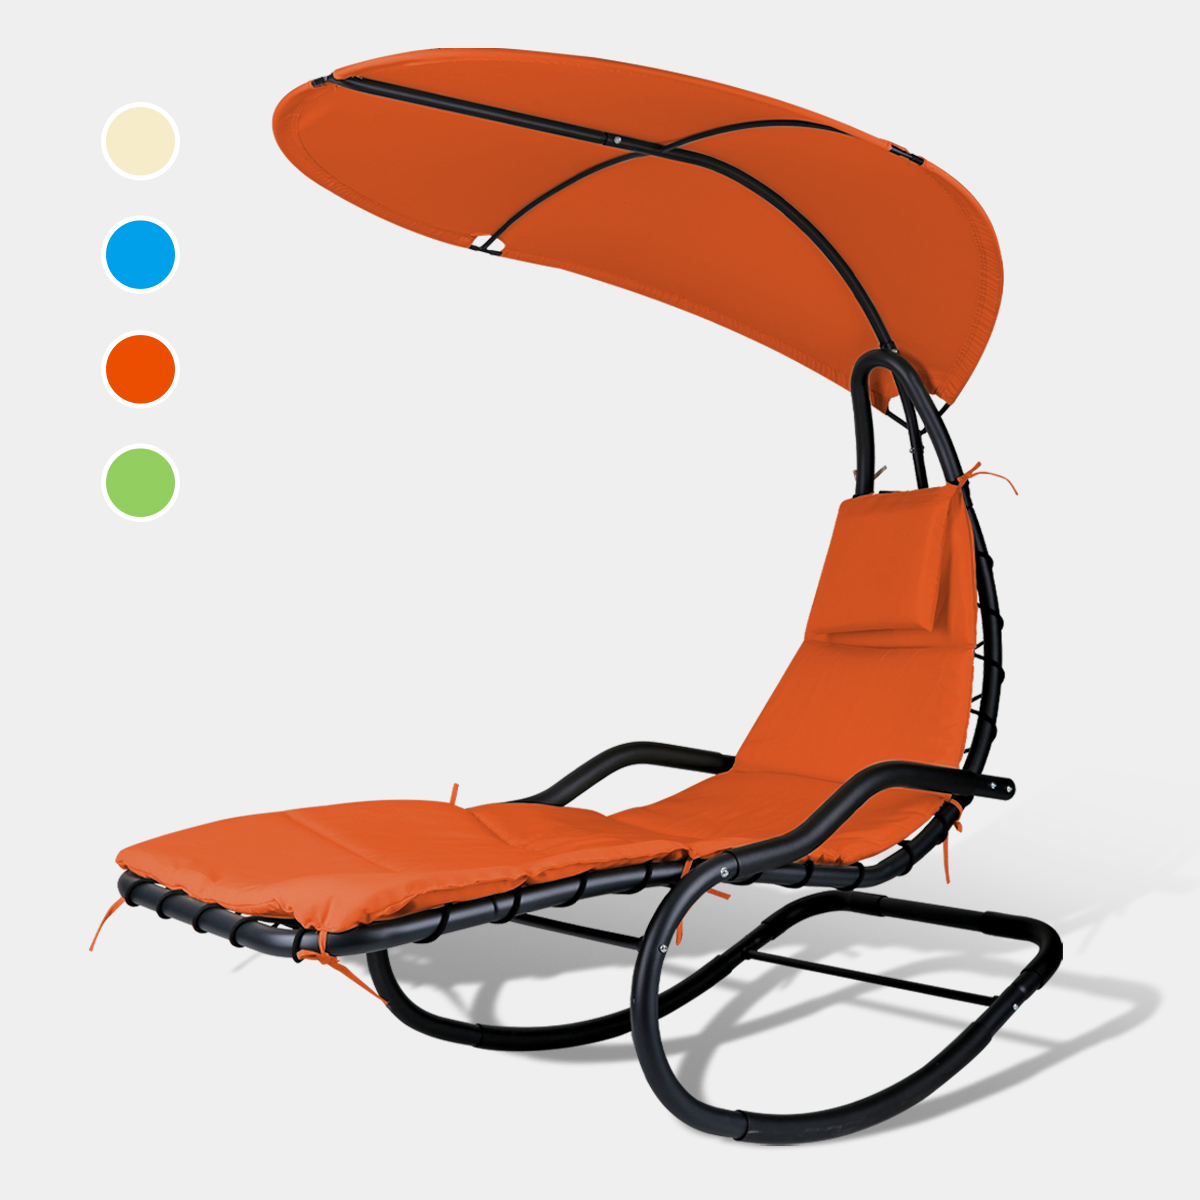 Rocking Hanging Lounge Chair - Curved Chaise Rocking Lounge Chair Swing For Backyard Patio w/ Built-in Pillow Removable Canopy with stand {Orange} - image 3 of 8